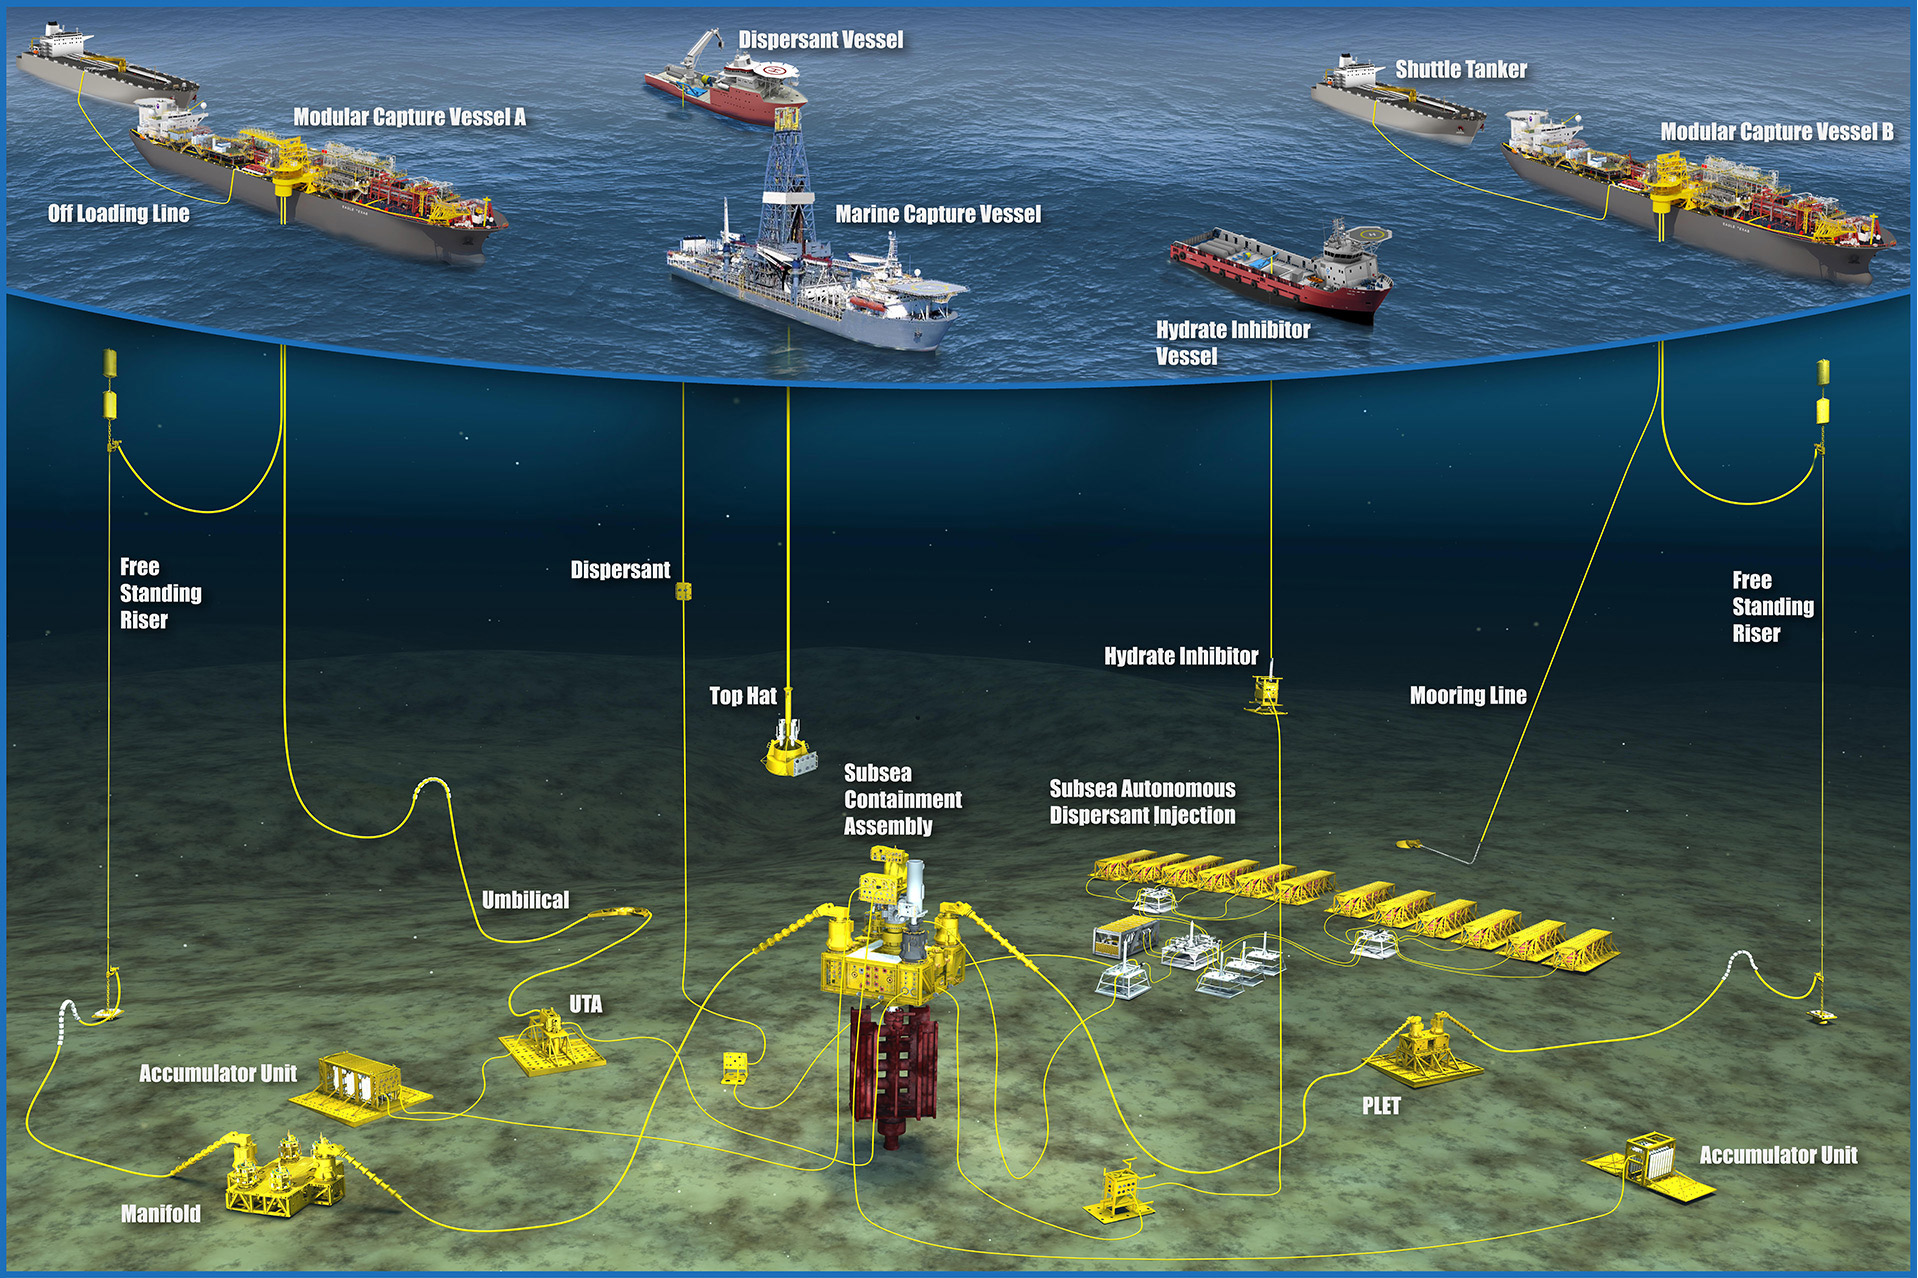 marine well containment system overview